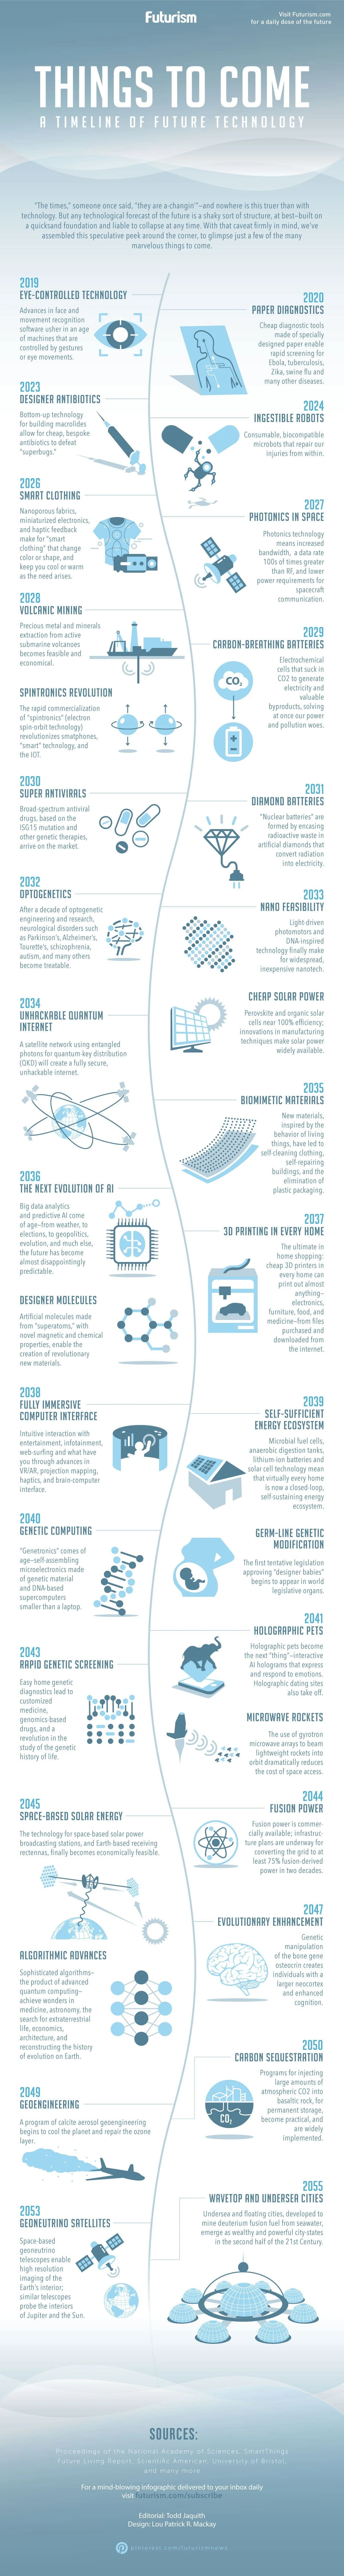 Things to Come: A Timeline of Future Technology - #infographic